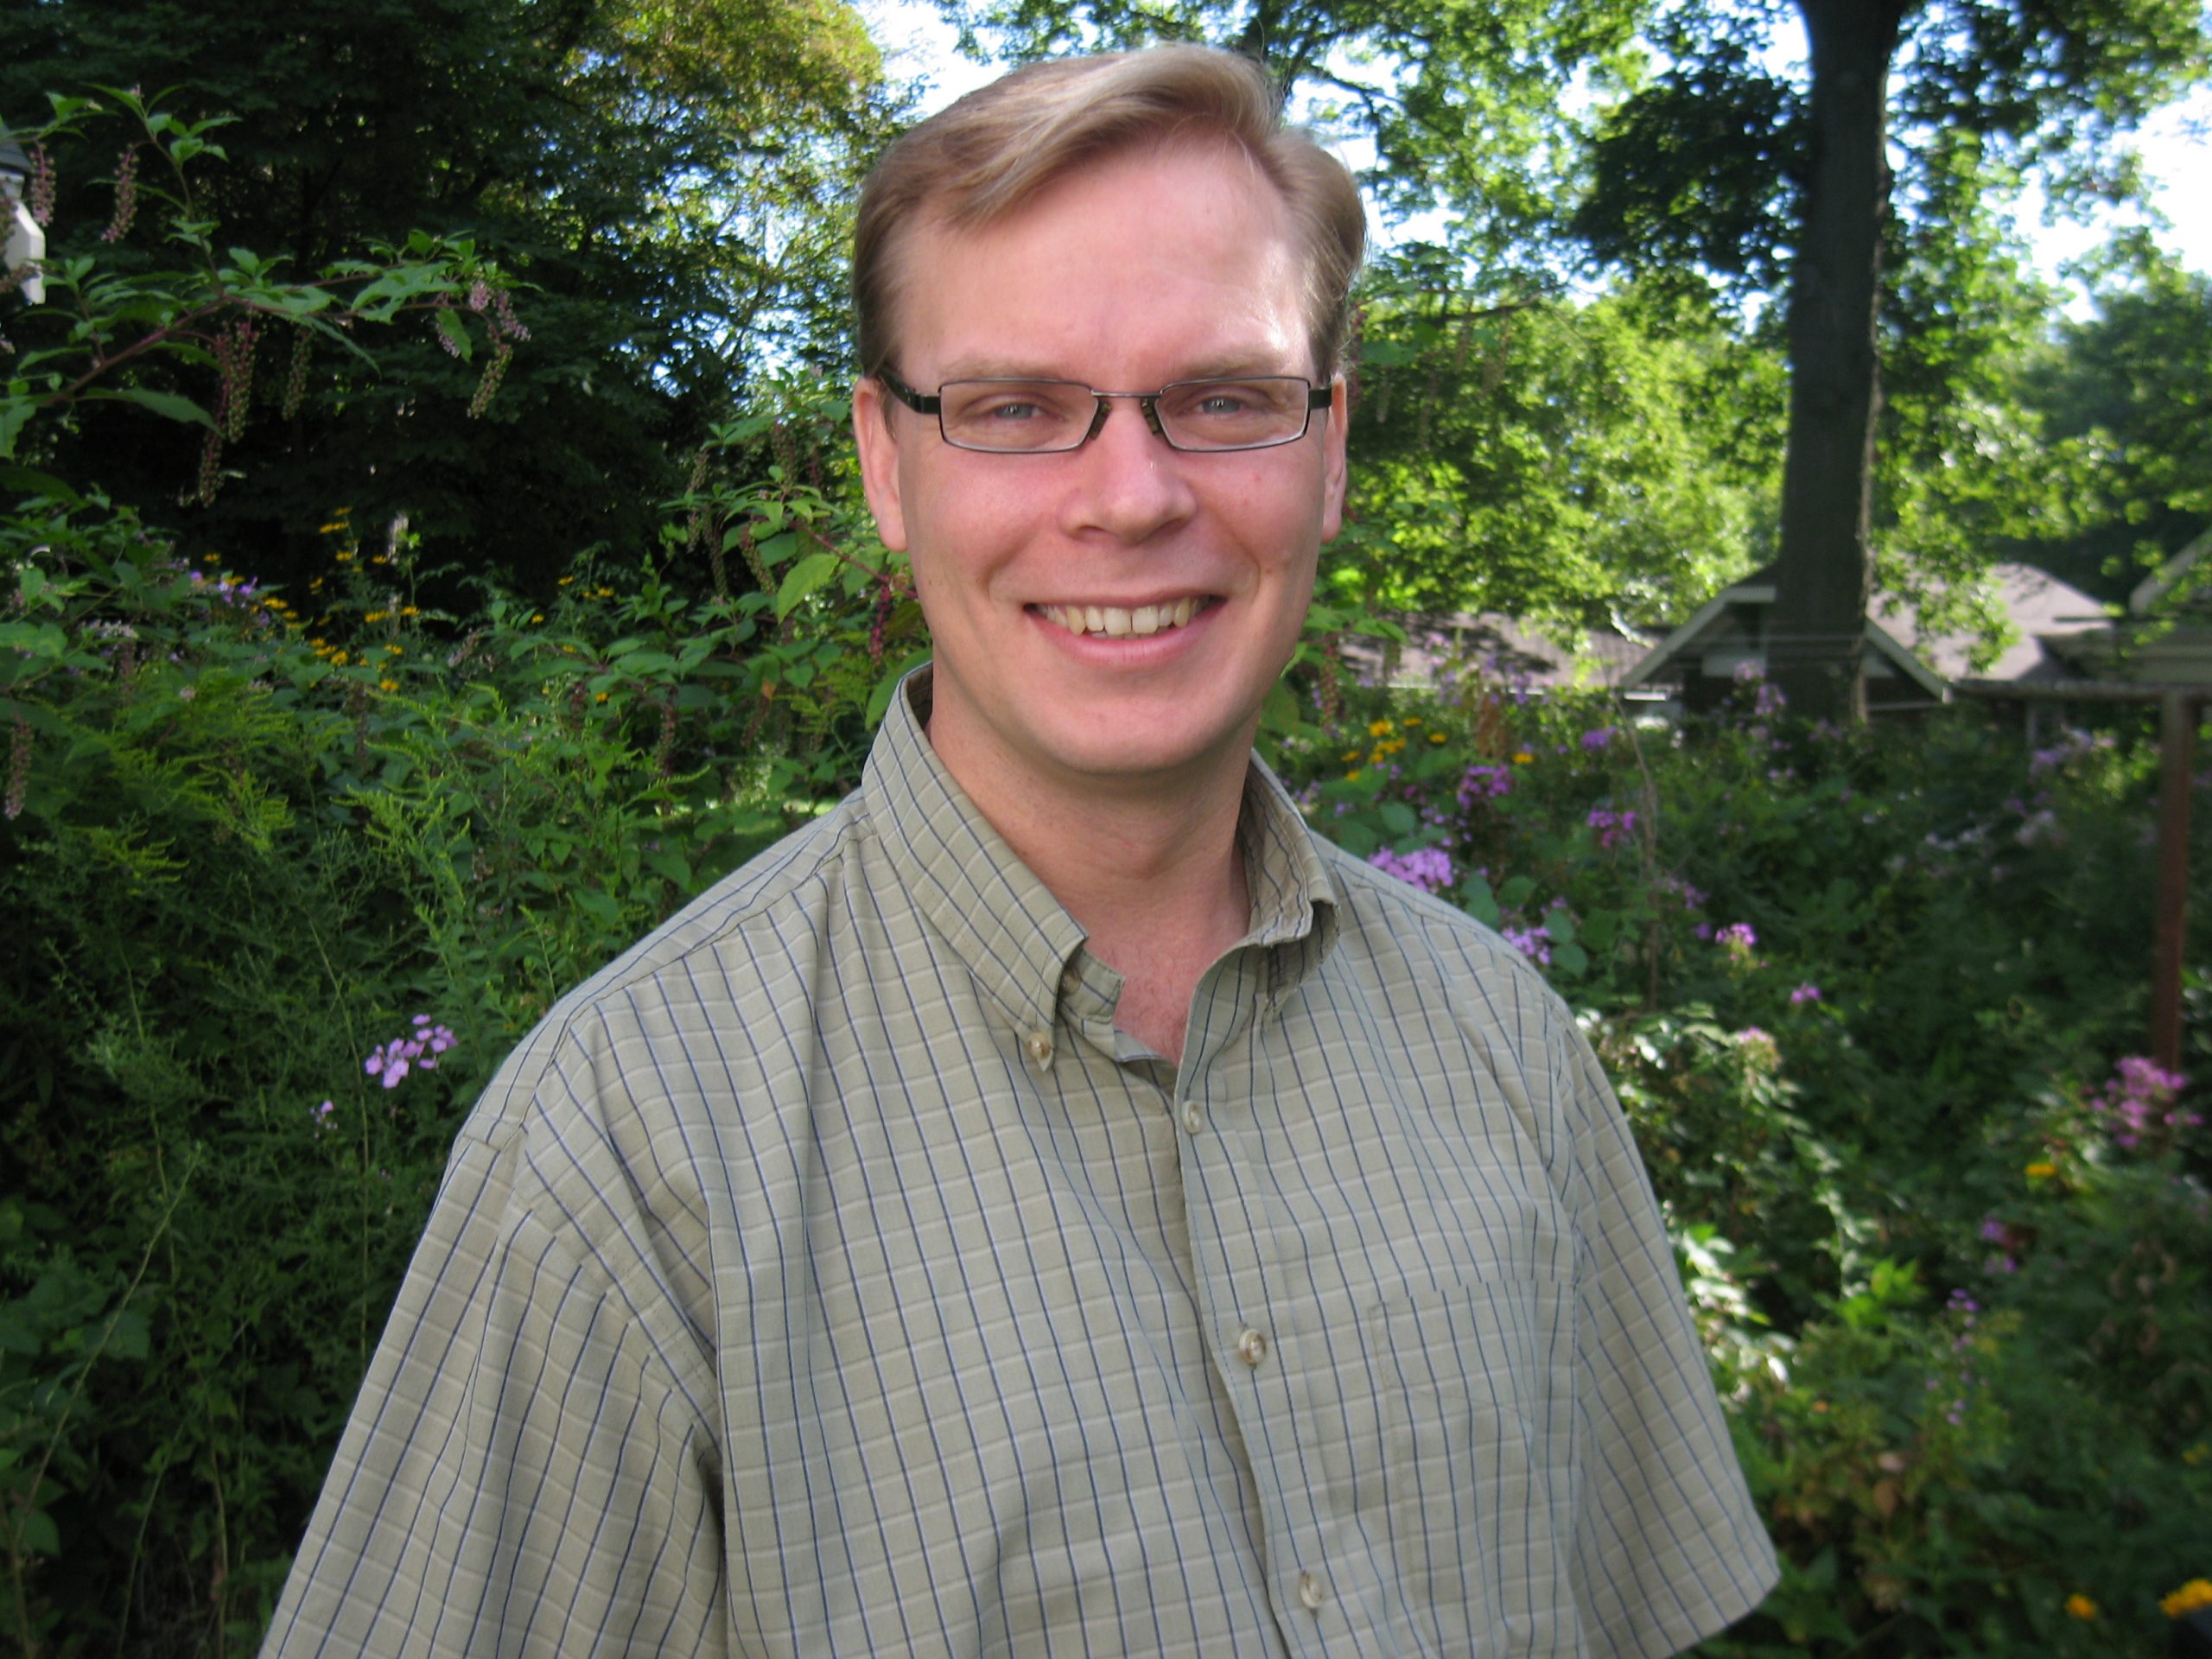 Head and shoulders portrait of a man with glasses, short brown hair, and a tan, checkered shirt smiling in front of foliage.